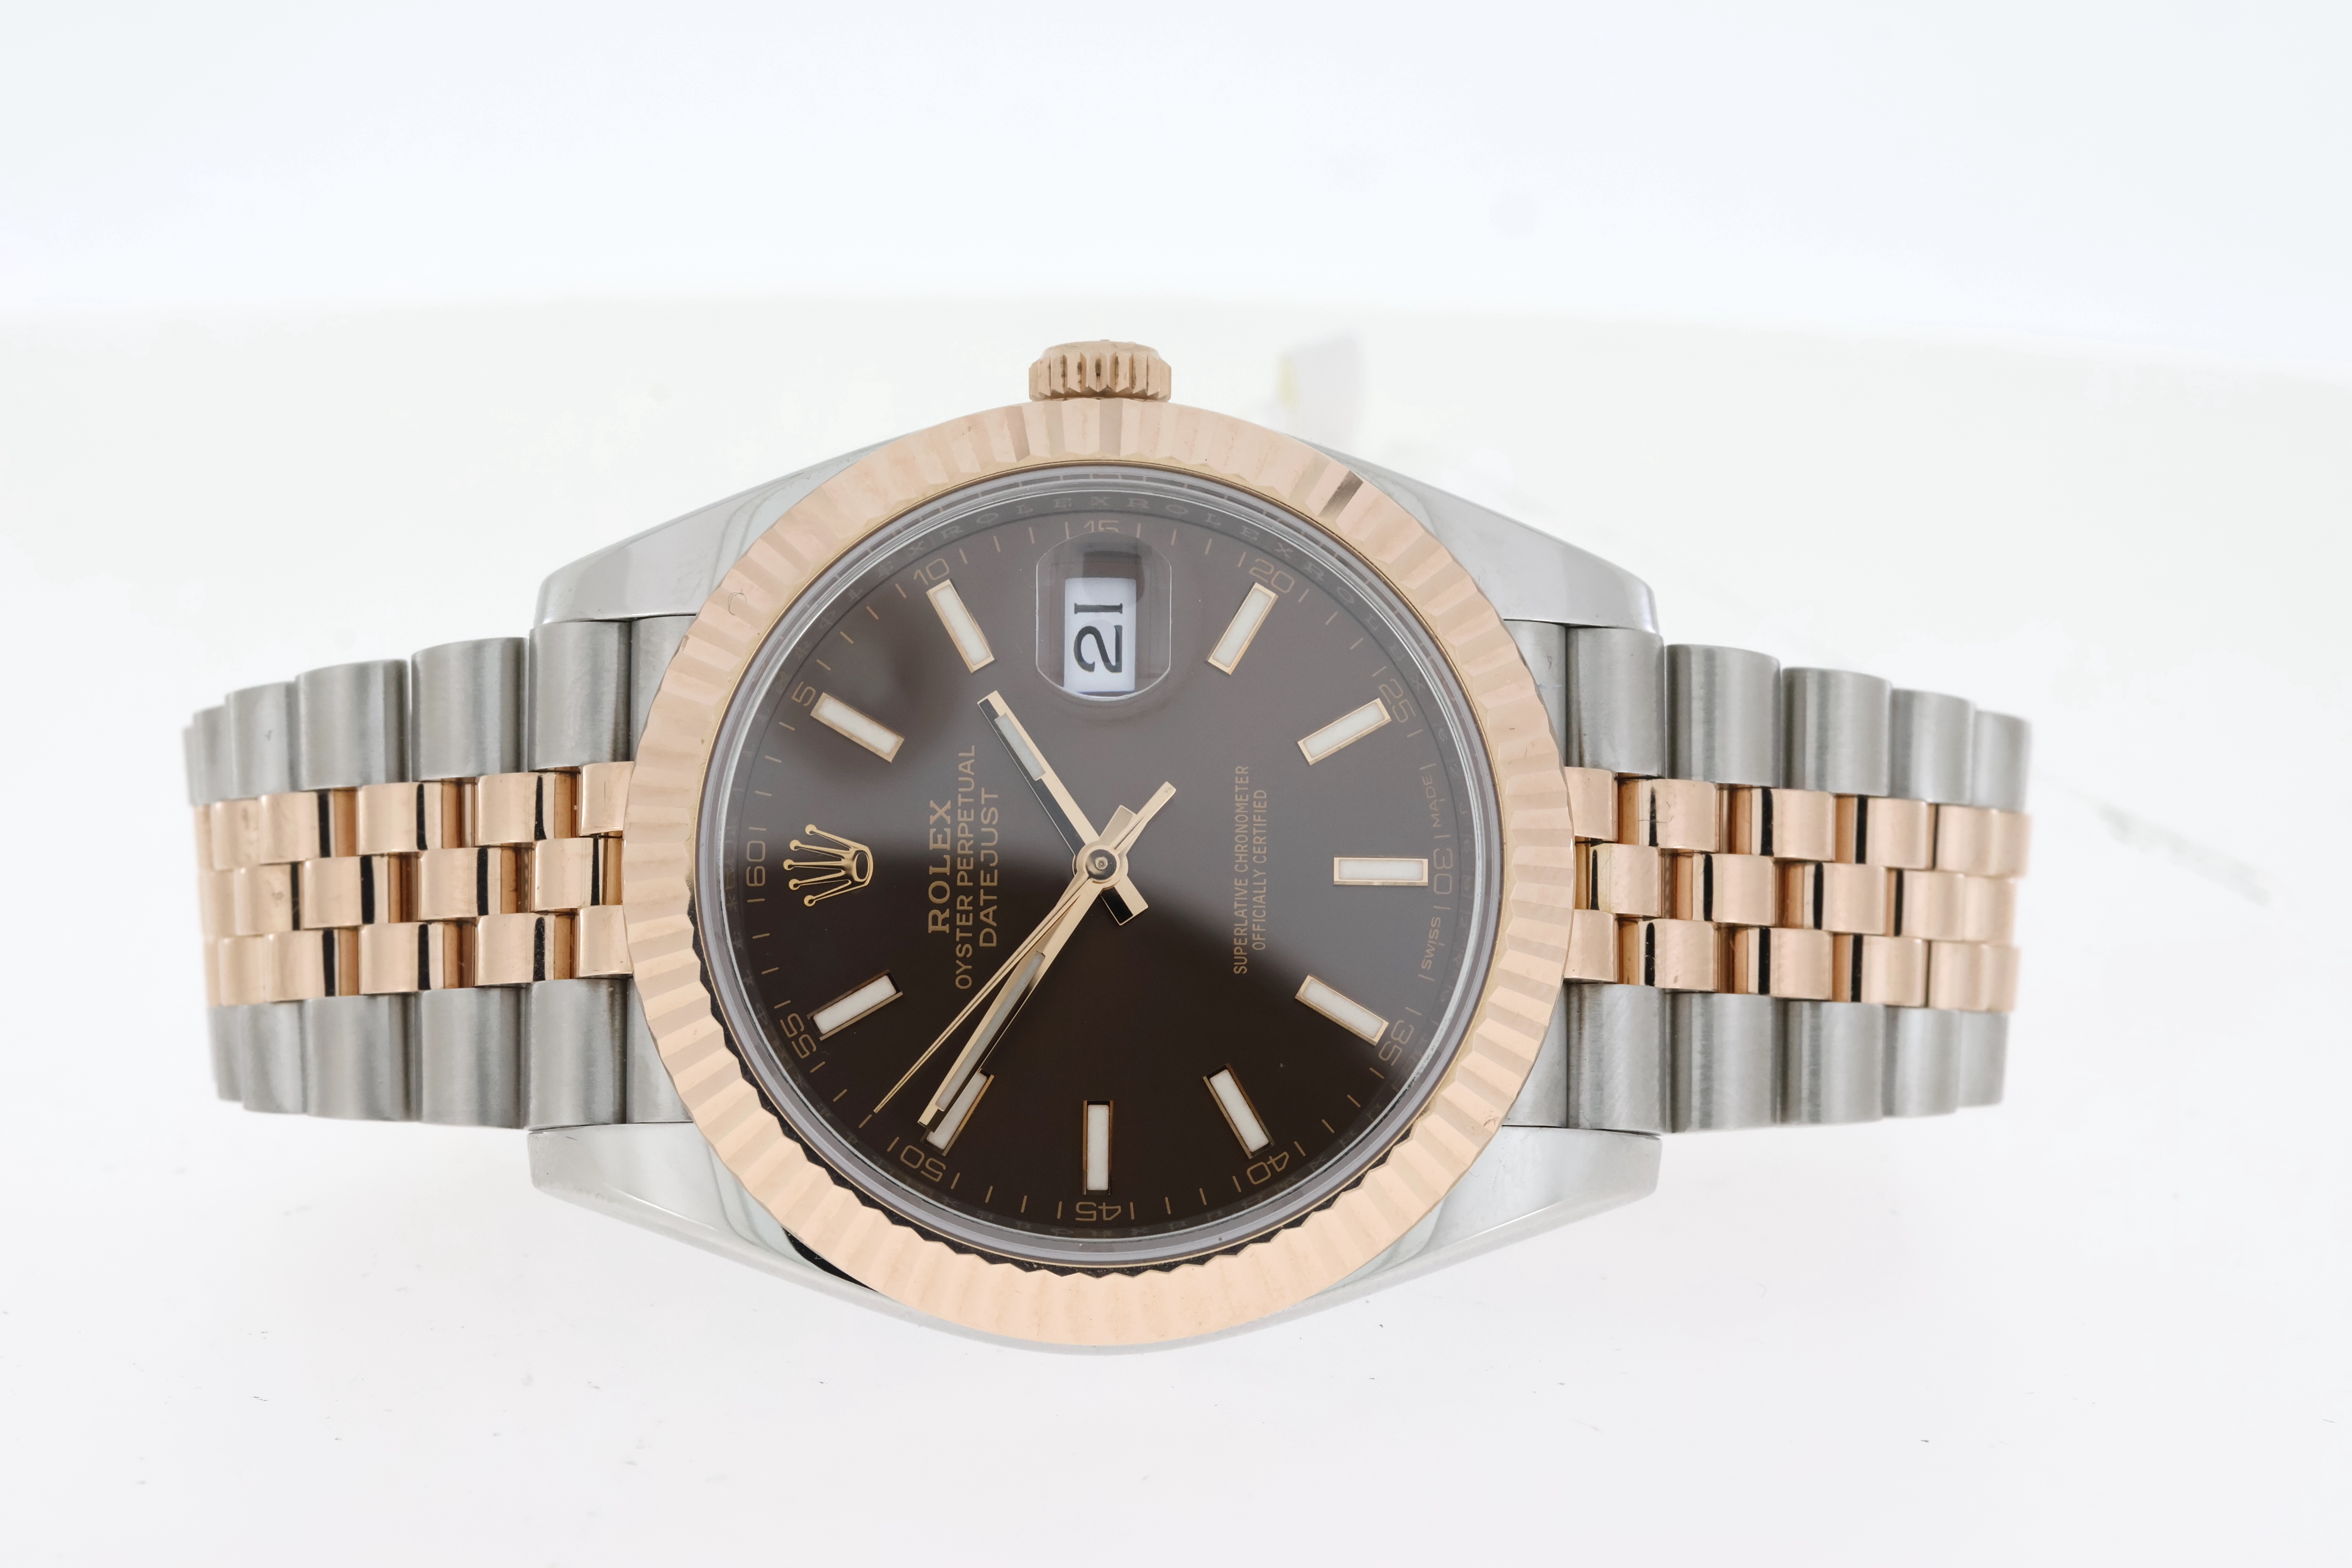 Rolex Datejust 41 Steel and Gold Automatic Reference 126331 with Box - Image 3 of 6